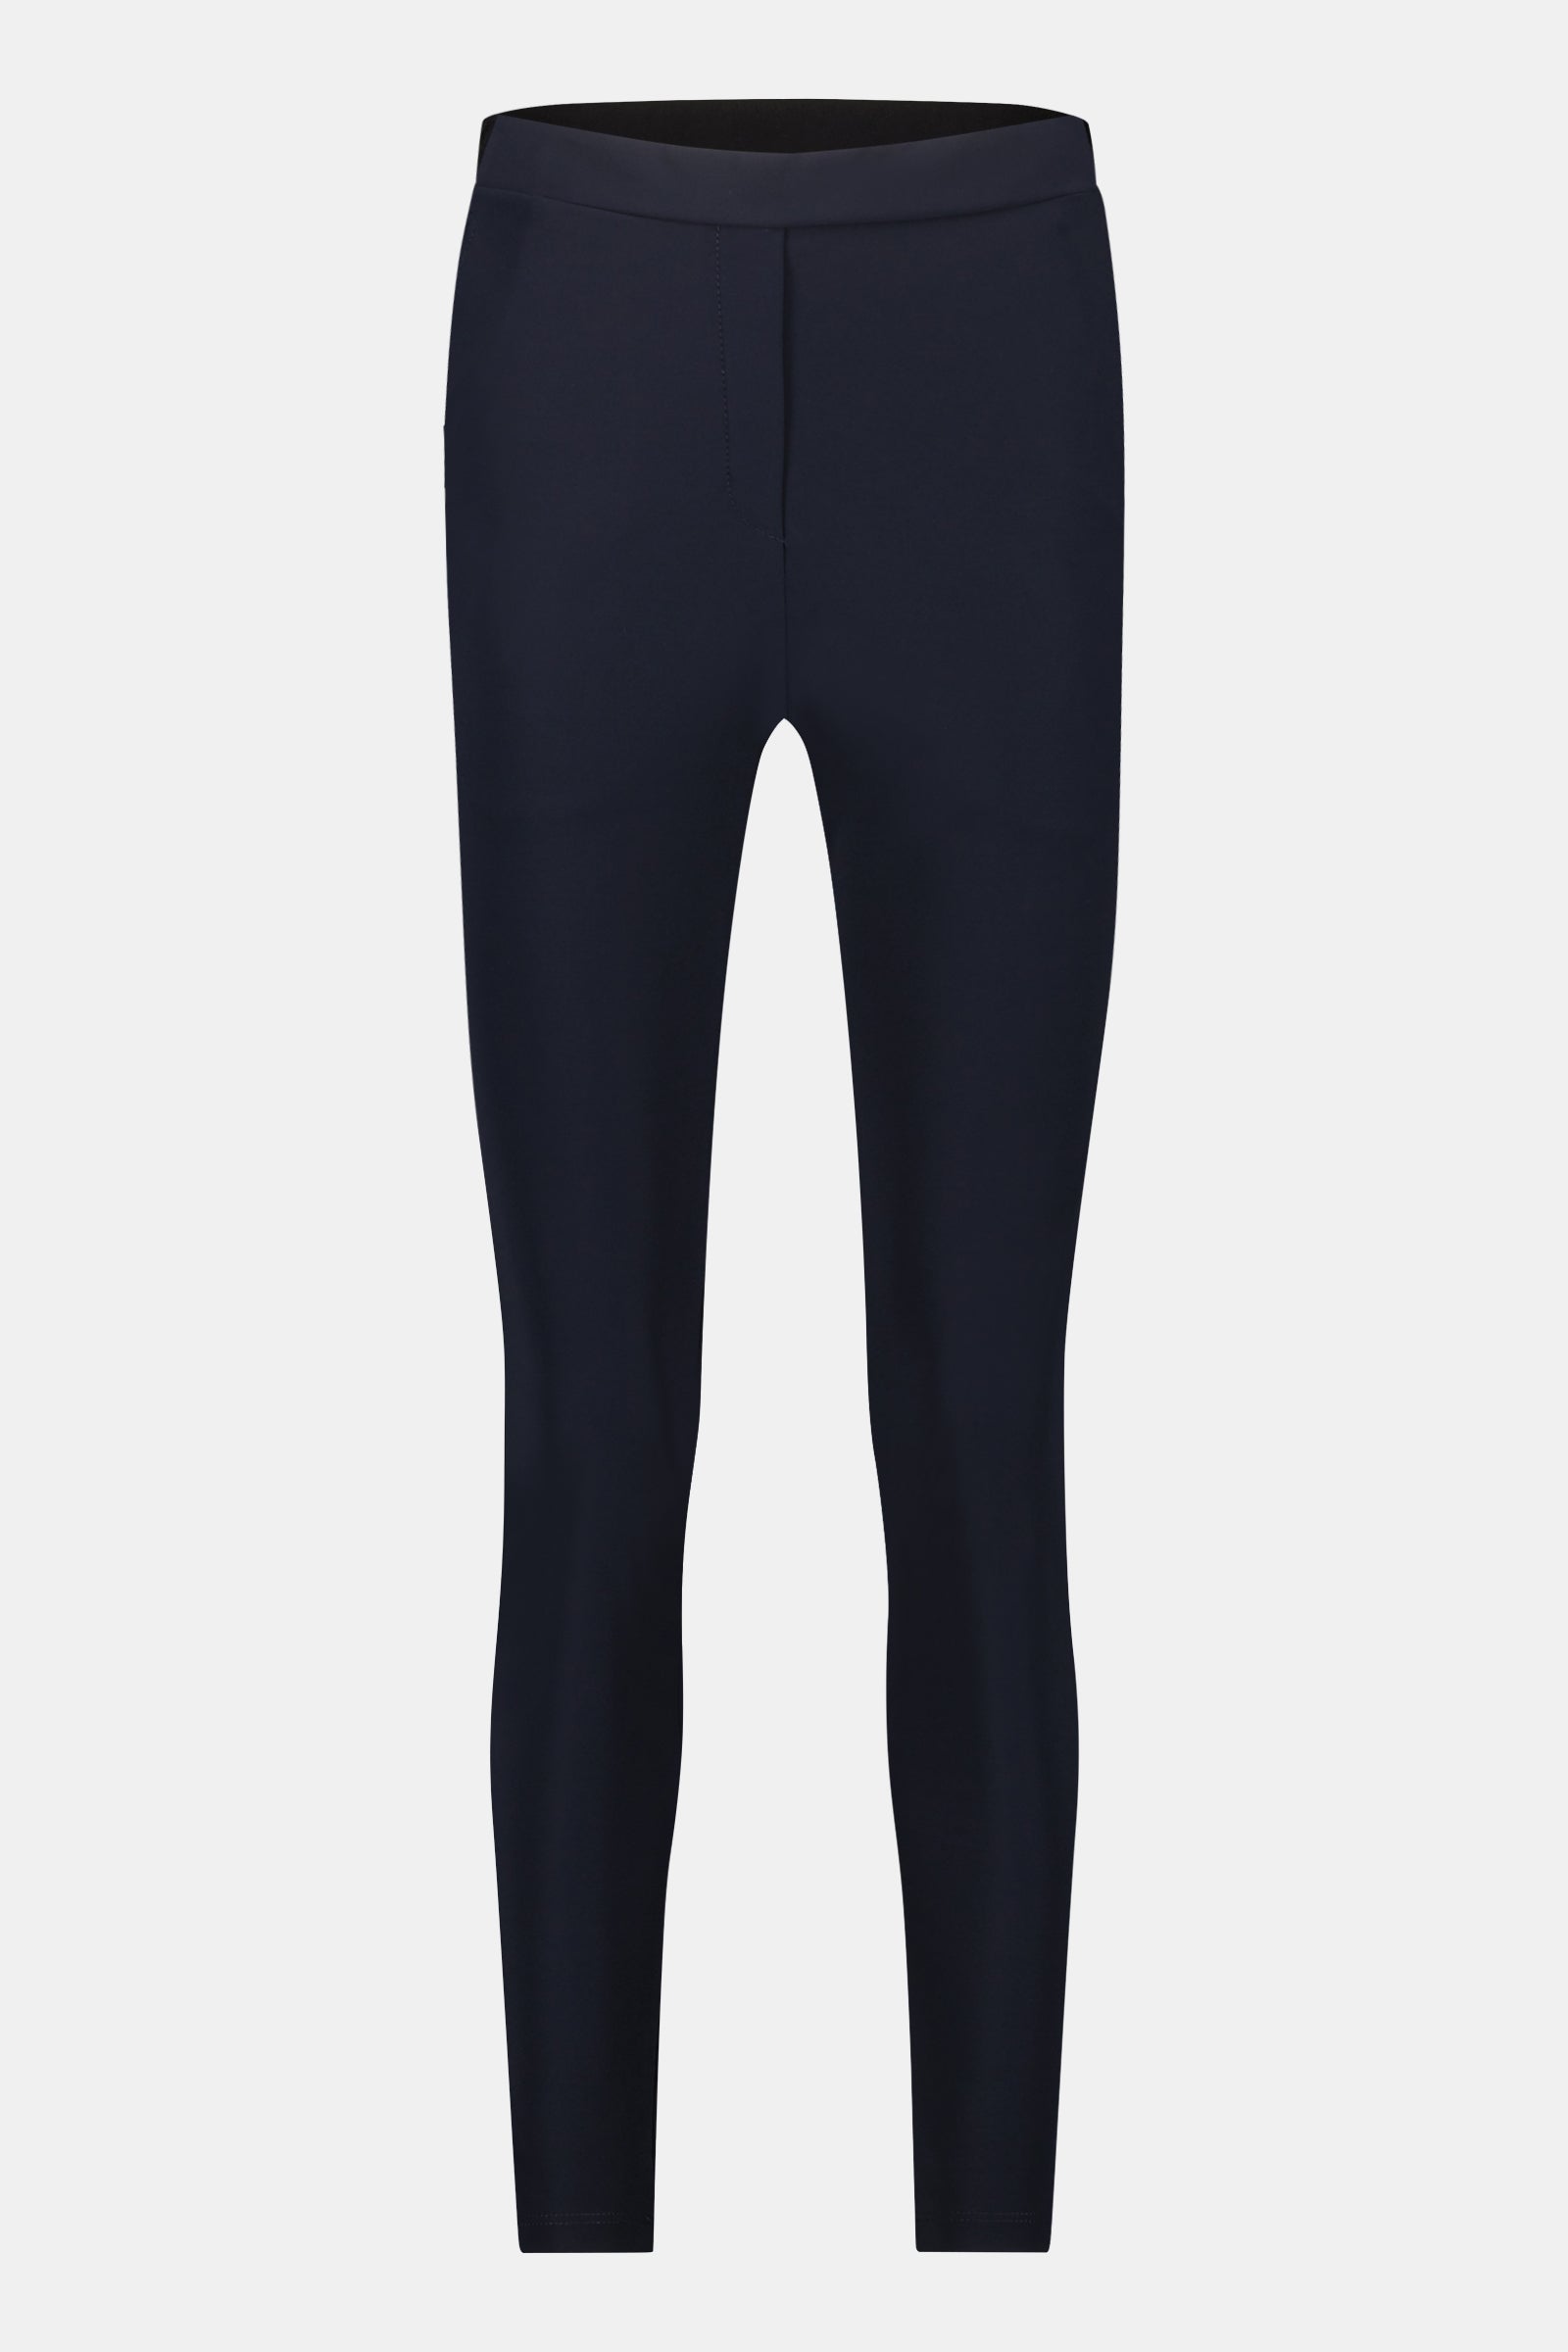 TROUSERS (SEATLE) NAVY